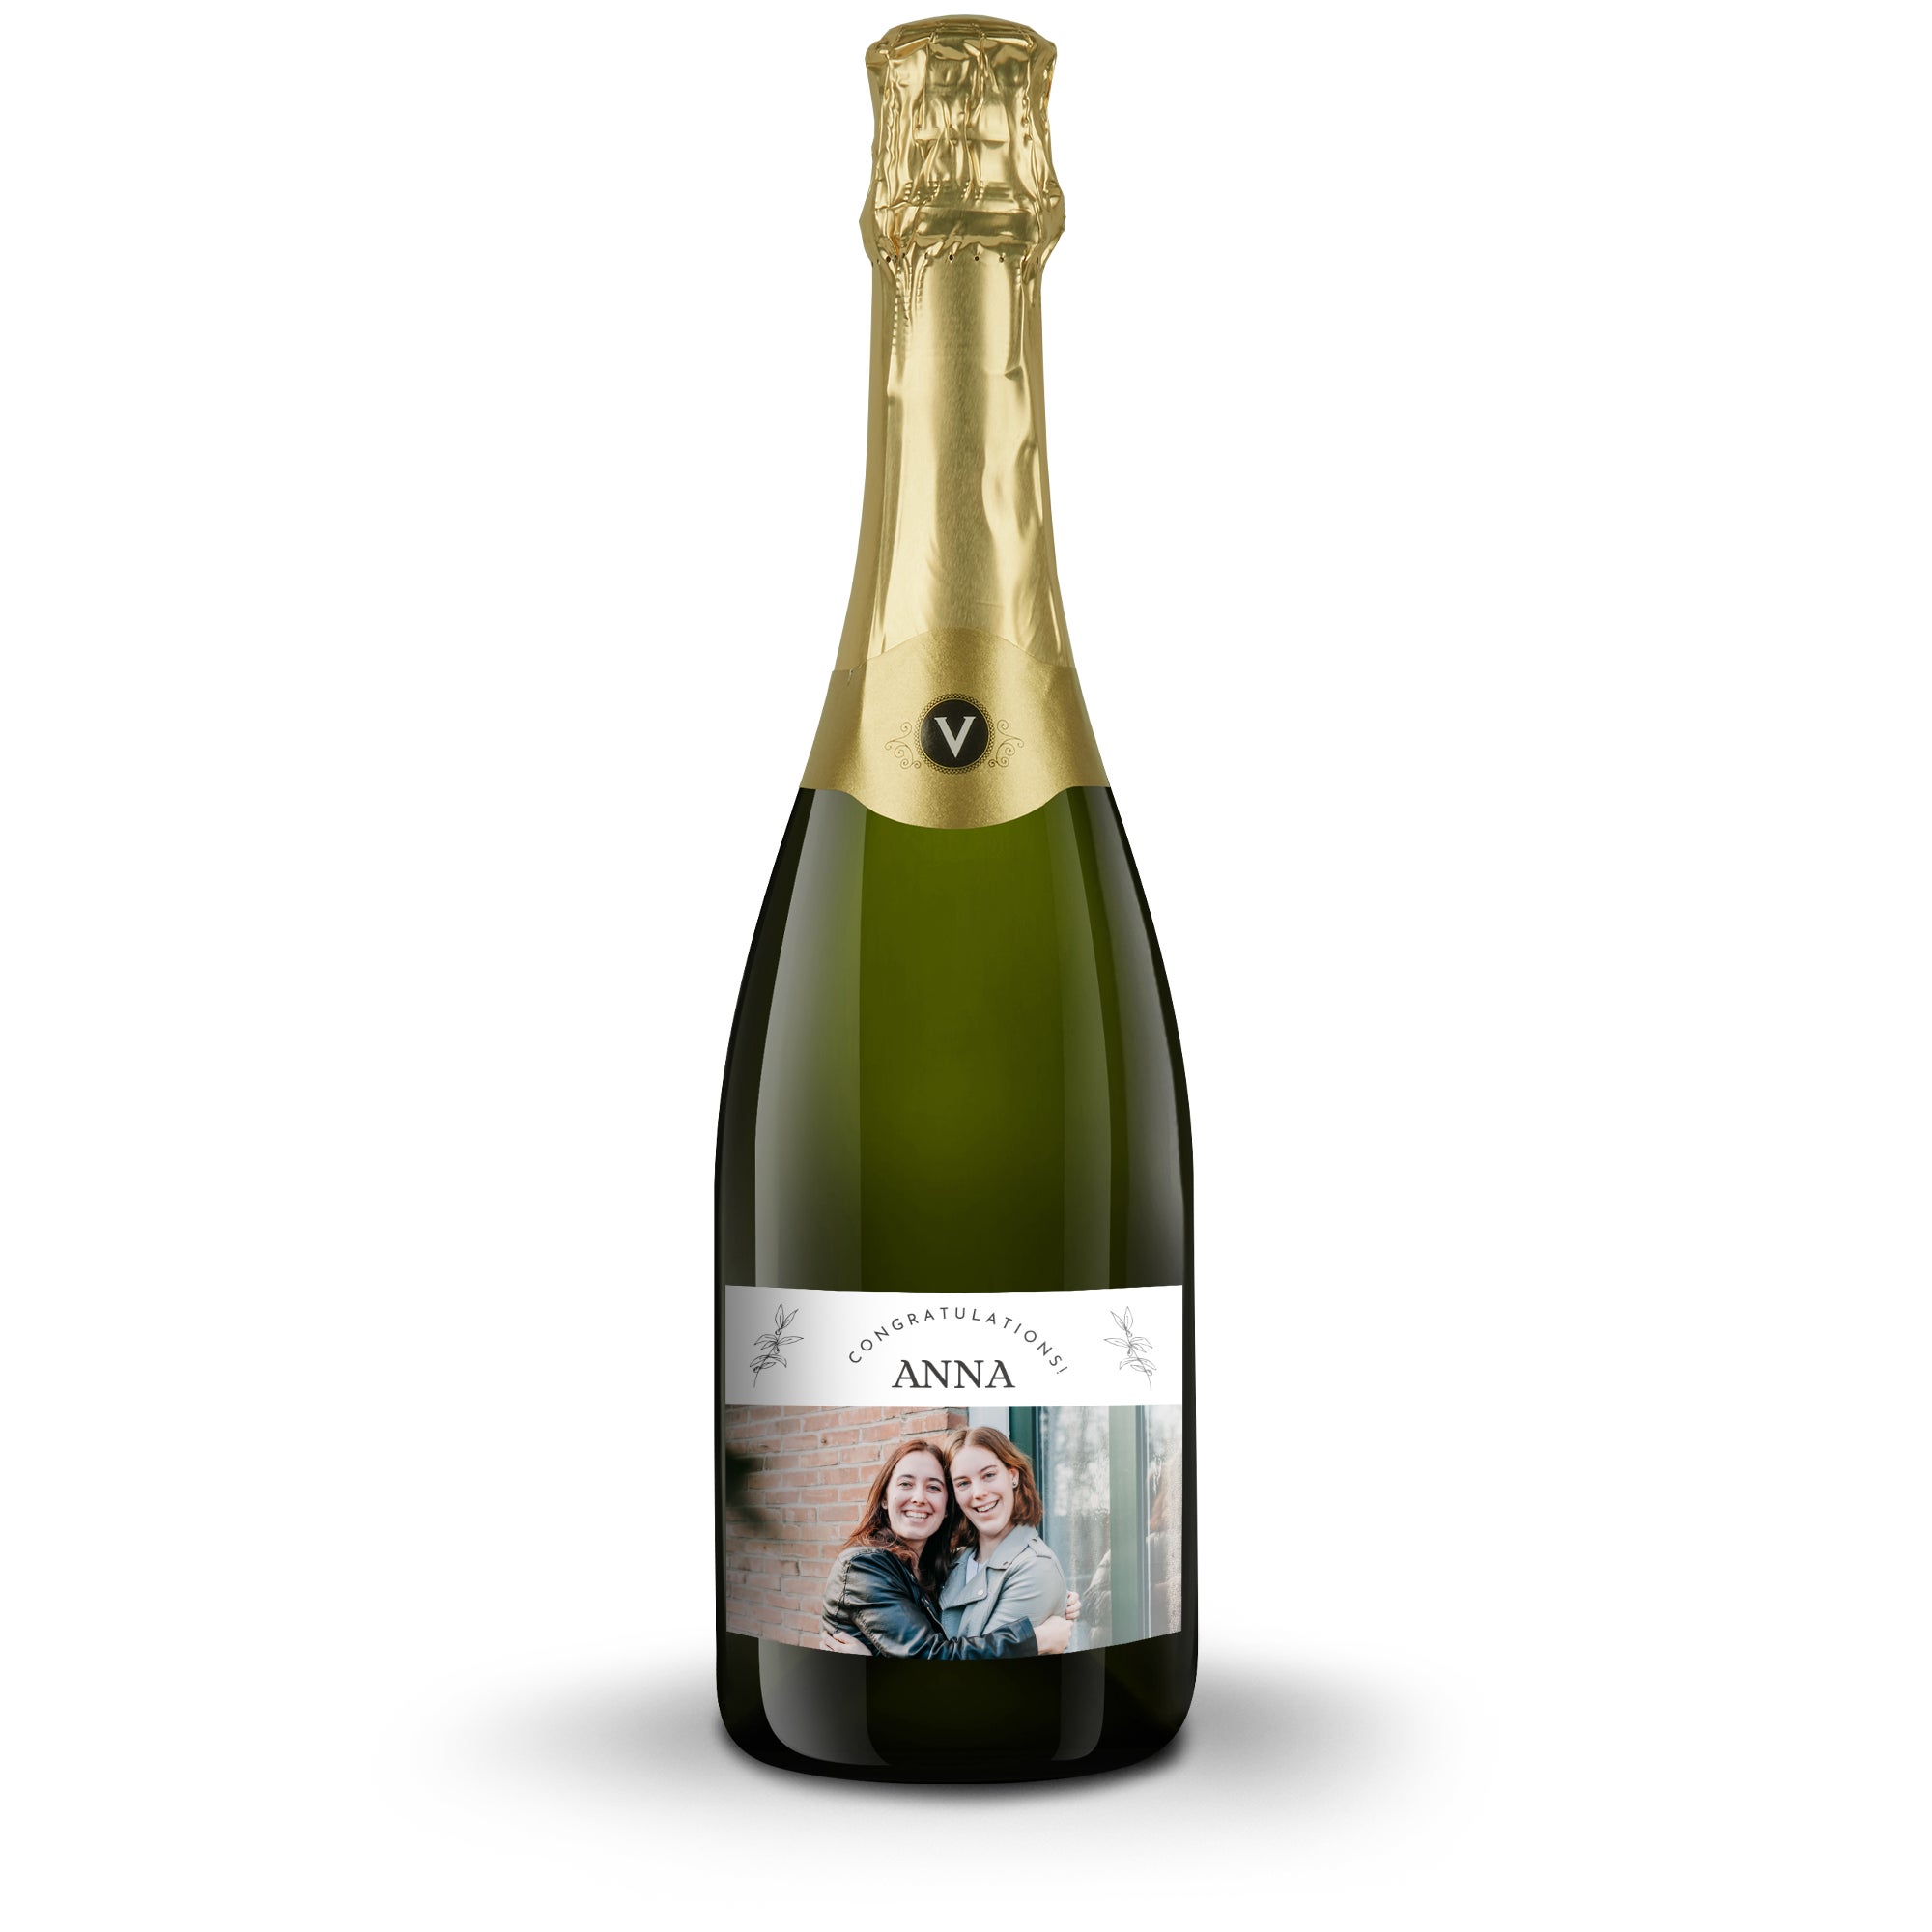 Wine with personalised label - Vintense Blanc alcohol-free